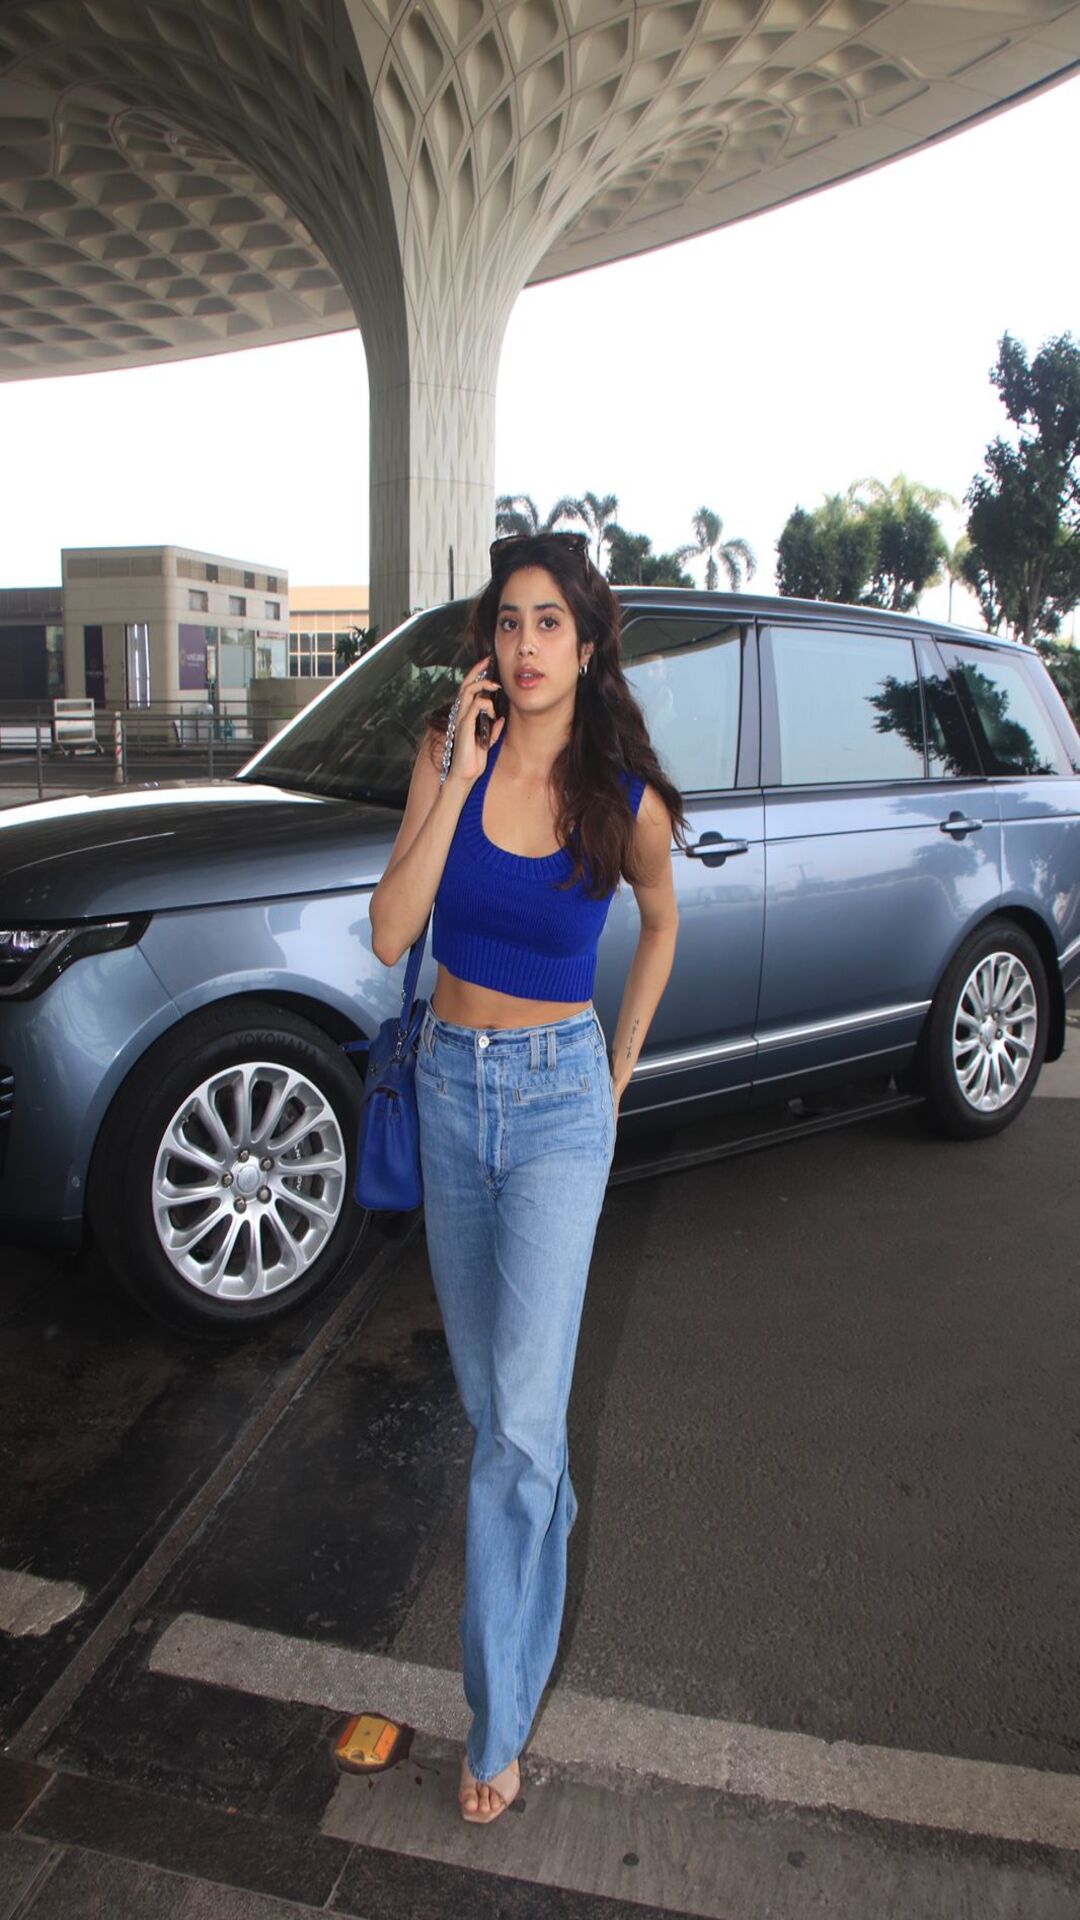 Janhvi Kapoor On Her Day Off Keeps It Chic In A White Crop Top, Blue Jeans  And A Rs 2 Lakh Balenciaga Handbag